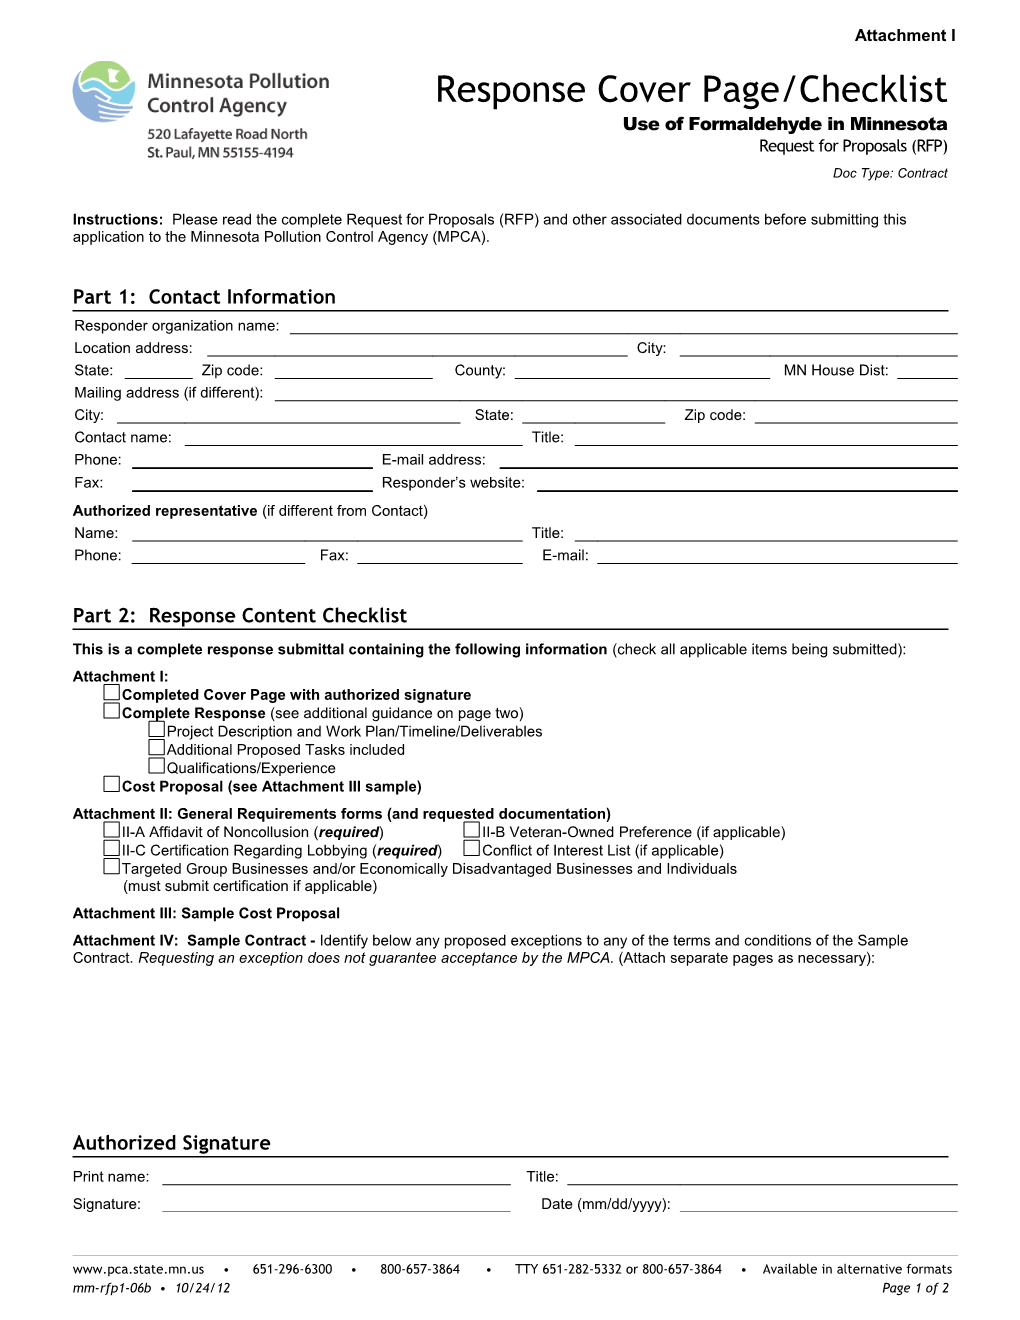 Response Cover Page/Checklist - Att I -Use of Formaldehyde in Minnesota - Form